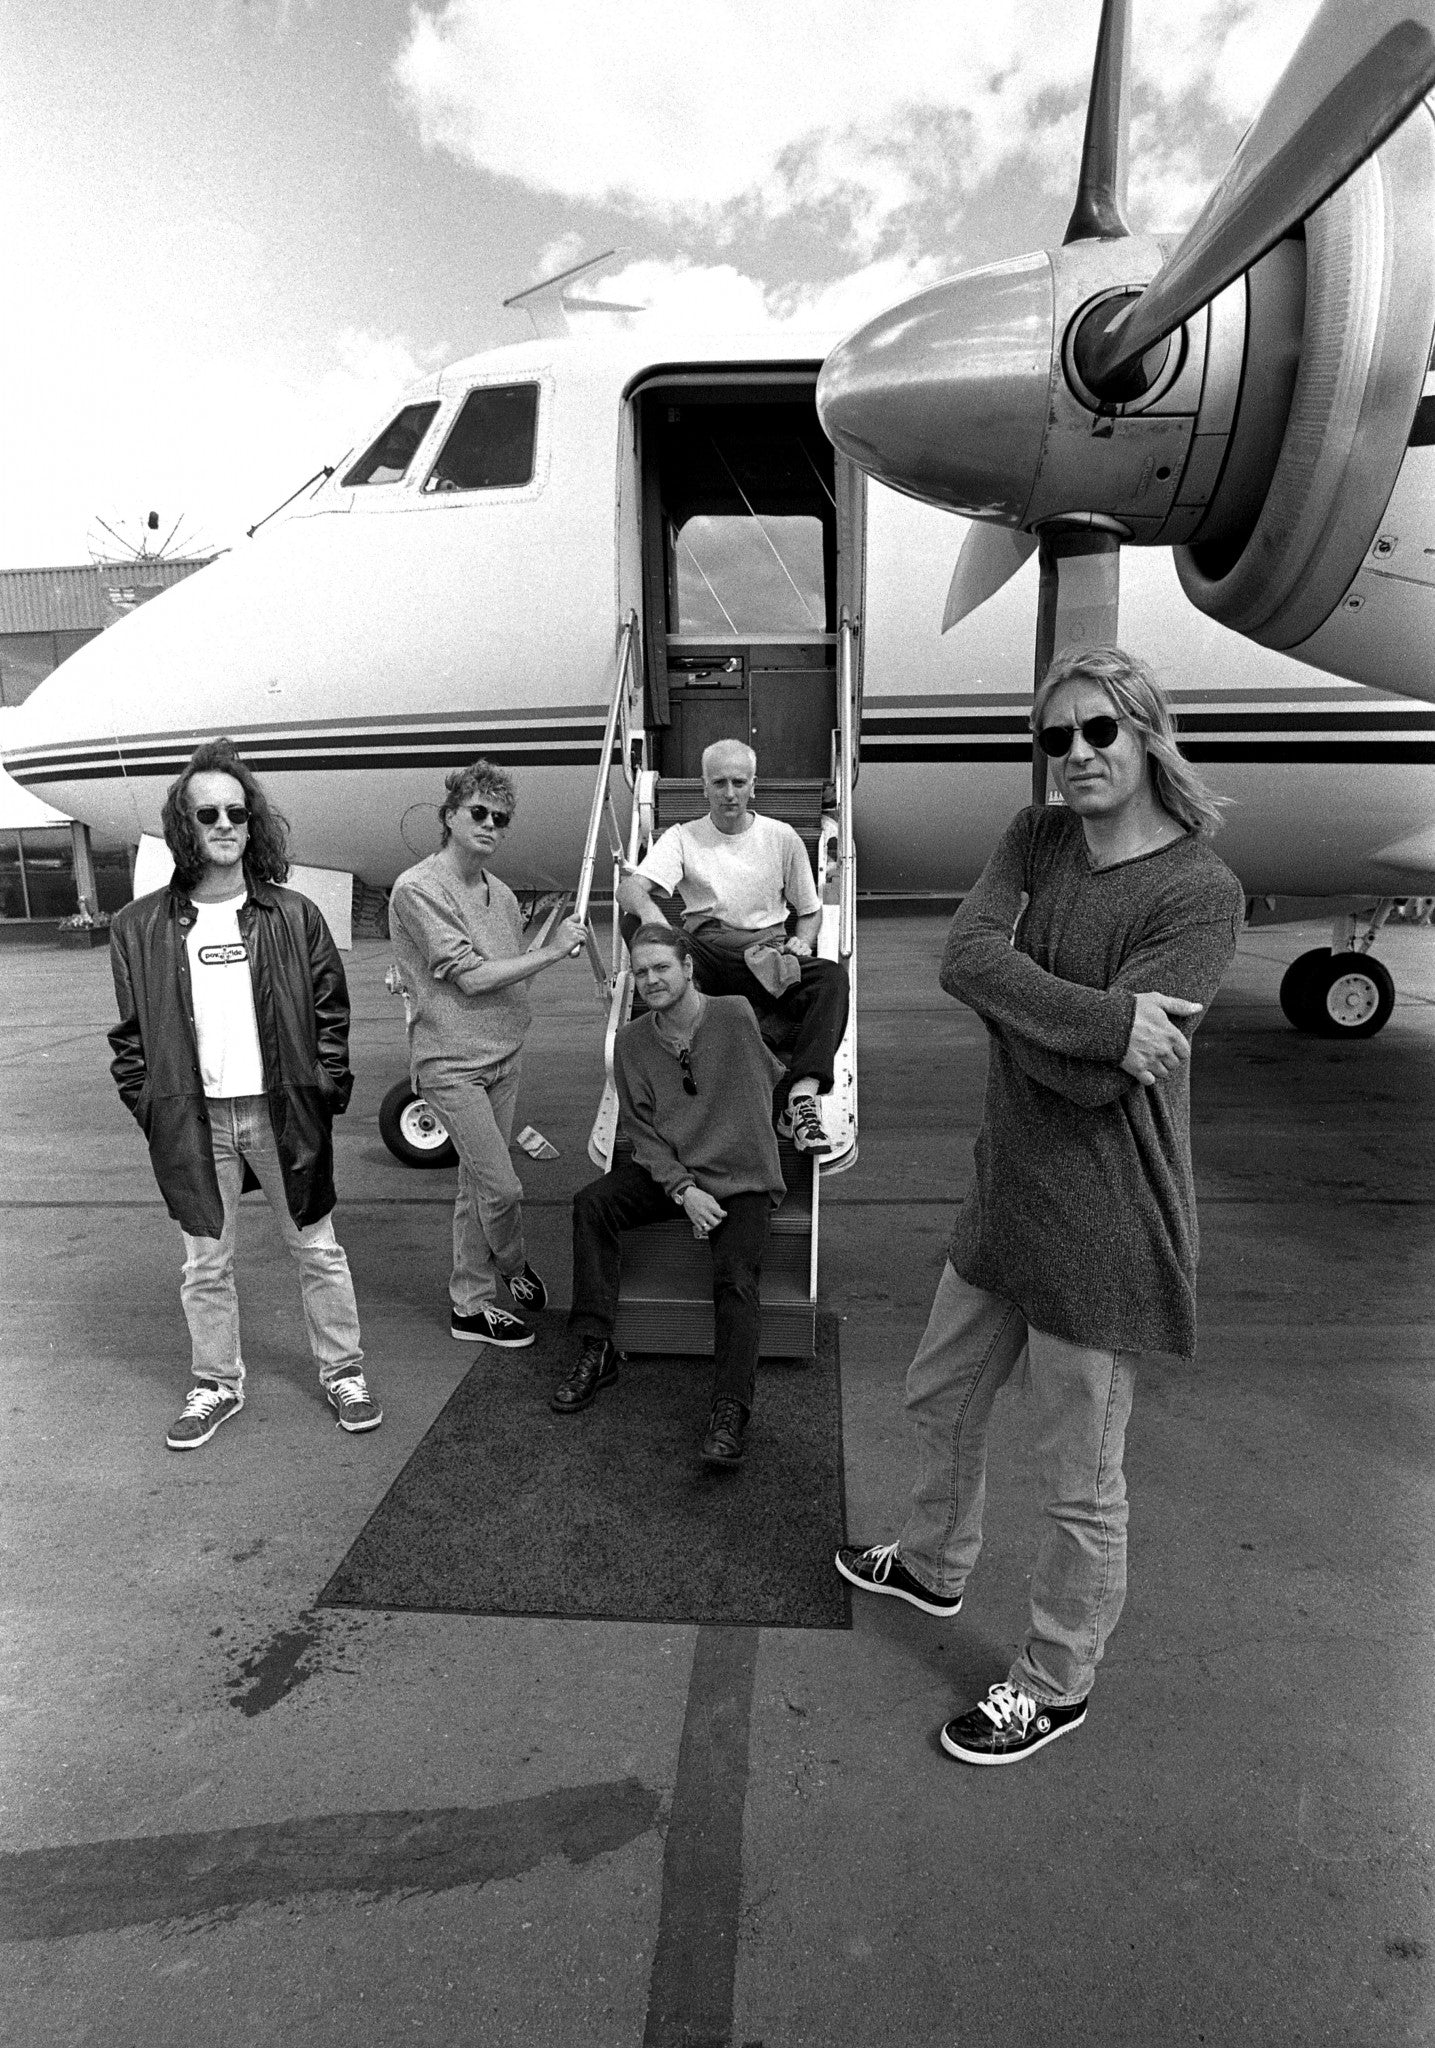 Def Leppard - Band Outside an Airplane, Canada, 1996 Poster